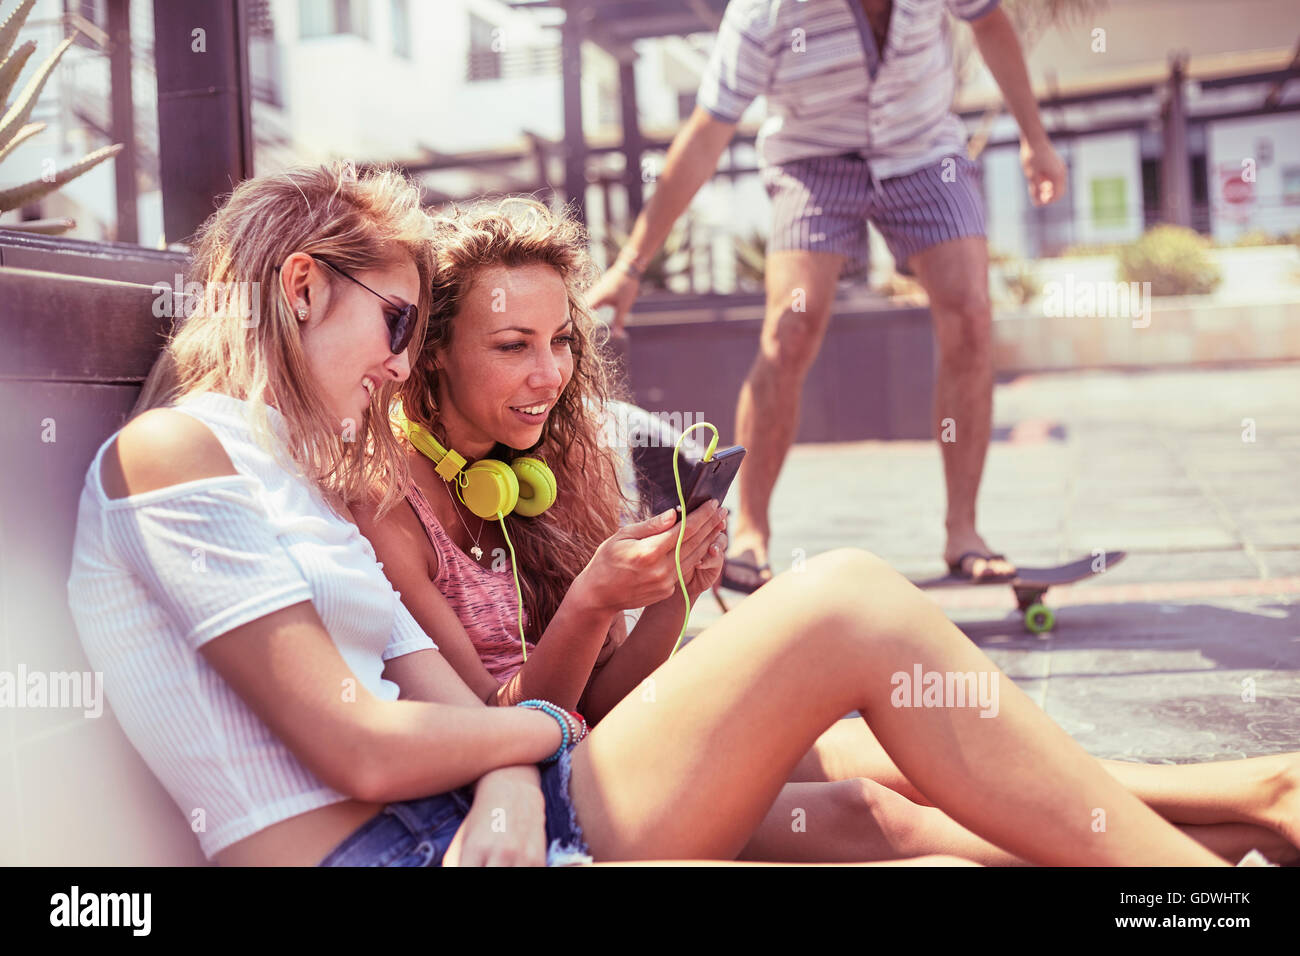 Young women hanging out with headphones and mp3 player Stock Photo